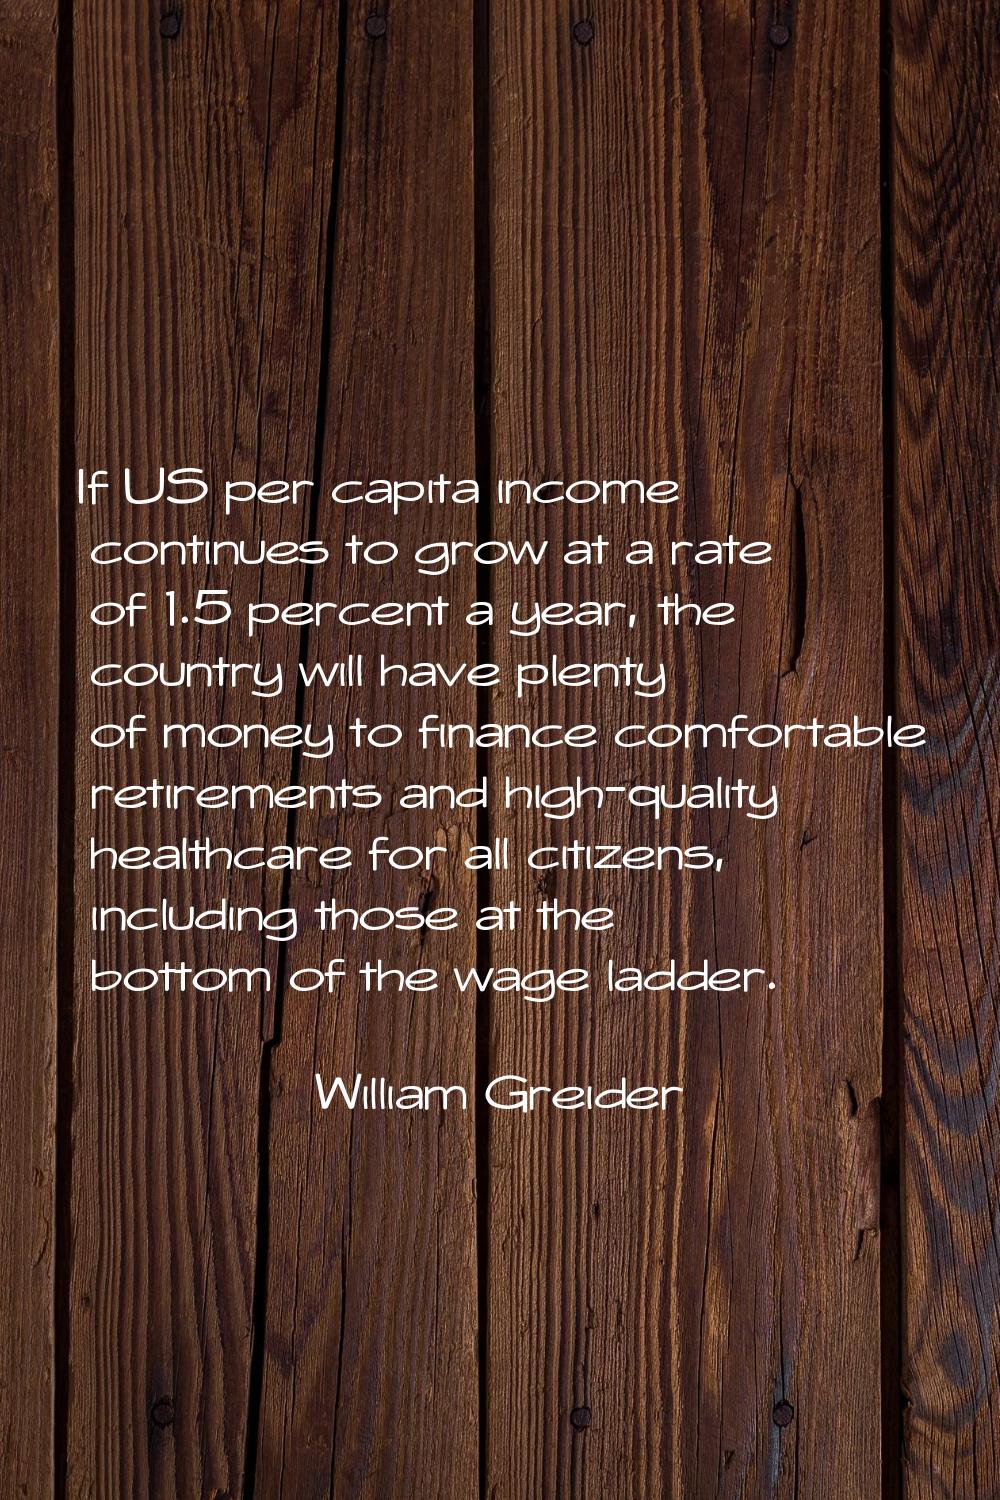 If US per capita income continues to grow at a rate of 1.5 percent a year, the country will have pl